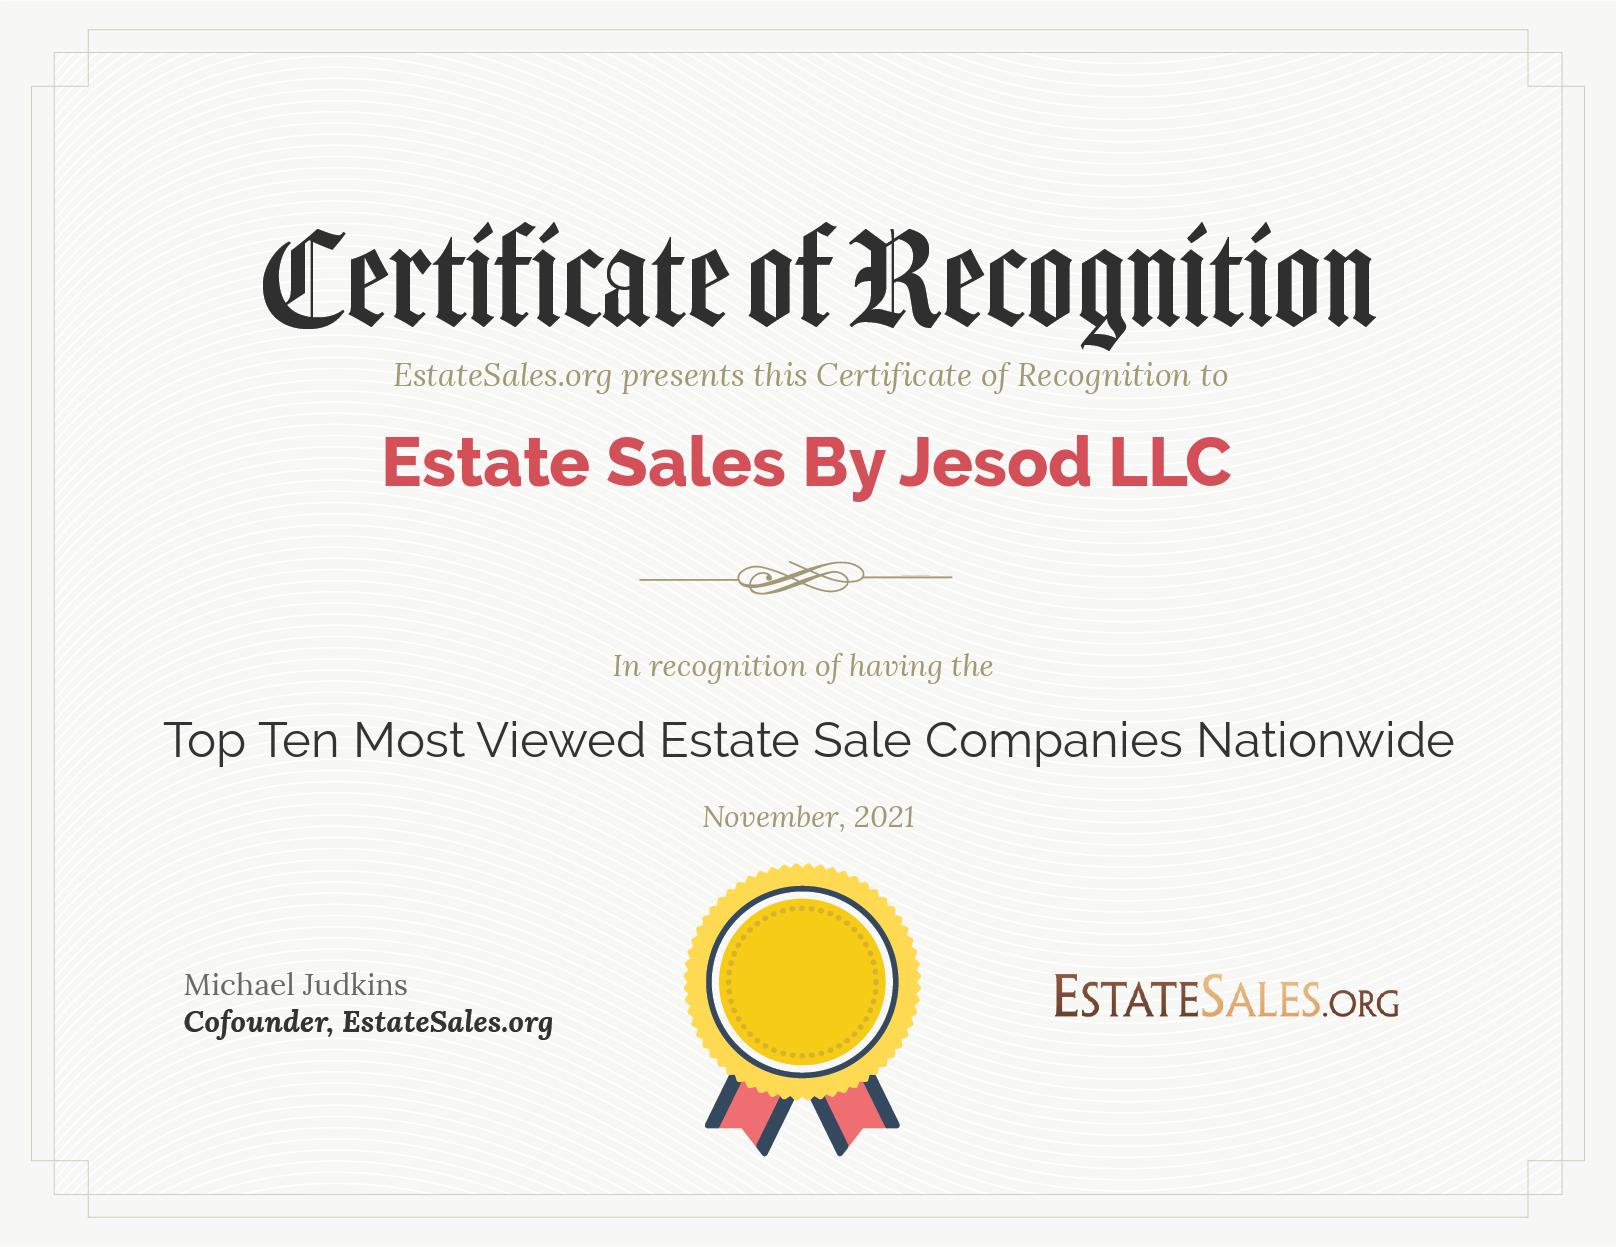 Top 10 Most Viewed Estate Sale Company NATIONWIDE